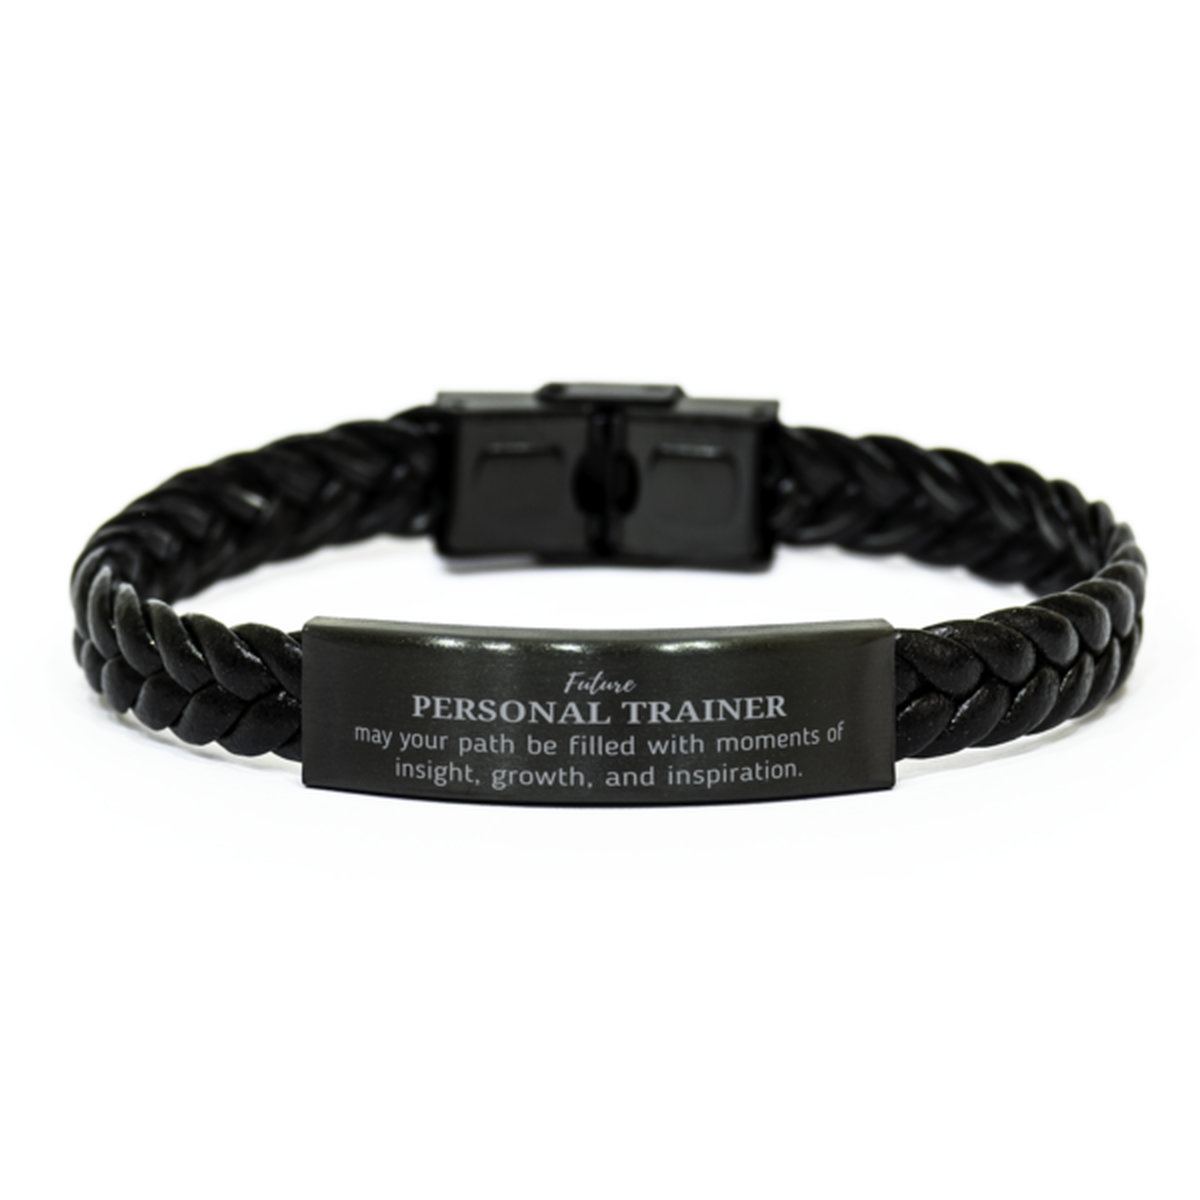 Future Personal Trainer Gifts, May your path be filled with moments of insight, Graduation Gifts for New Personal Trainer, Christmas Unique Braided Leather Bracelet For Men, Women, Friends